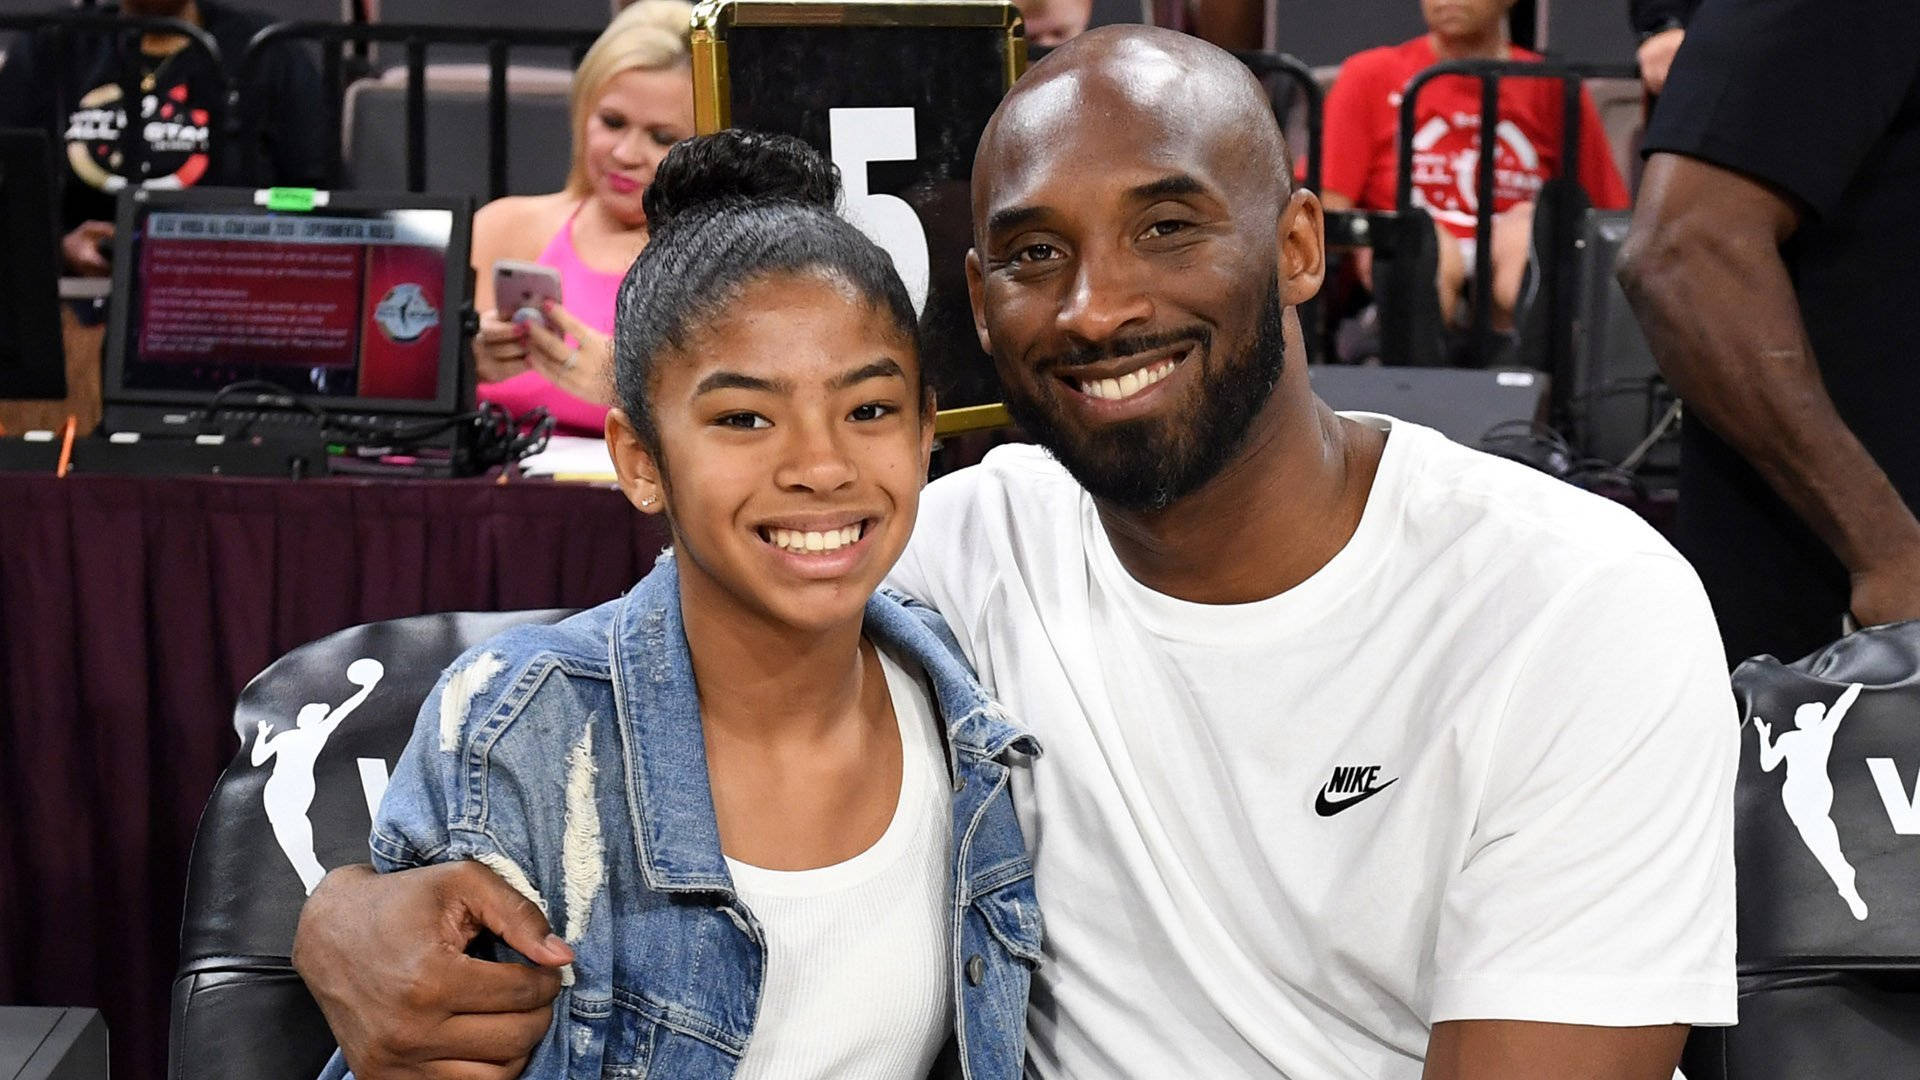 "Kobe Bryant takes a moment to share love and laugh with daughter Gianna." Wallpaper